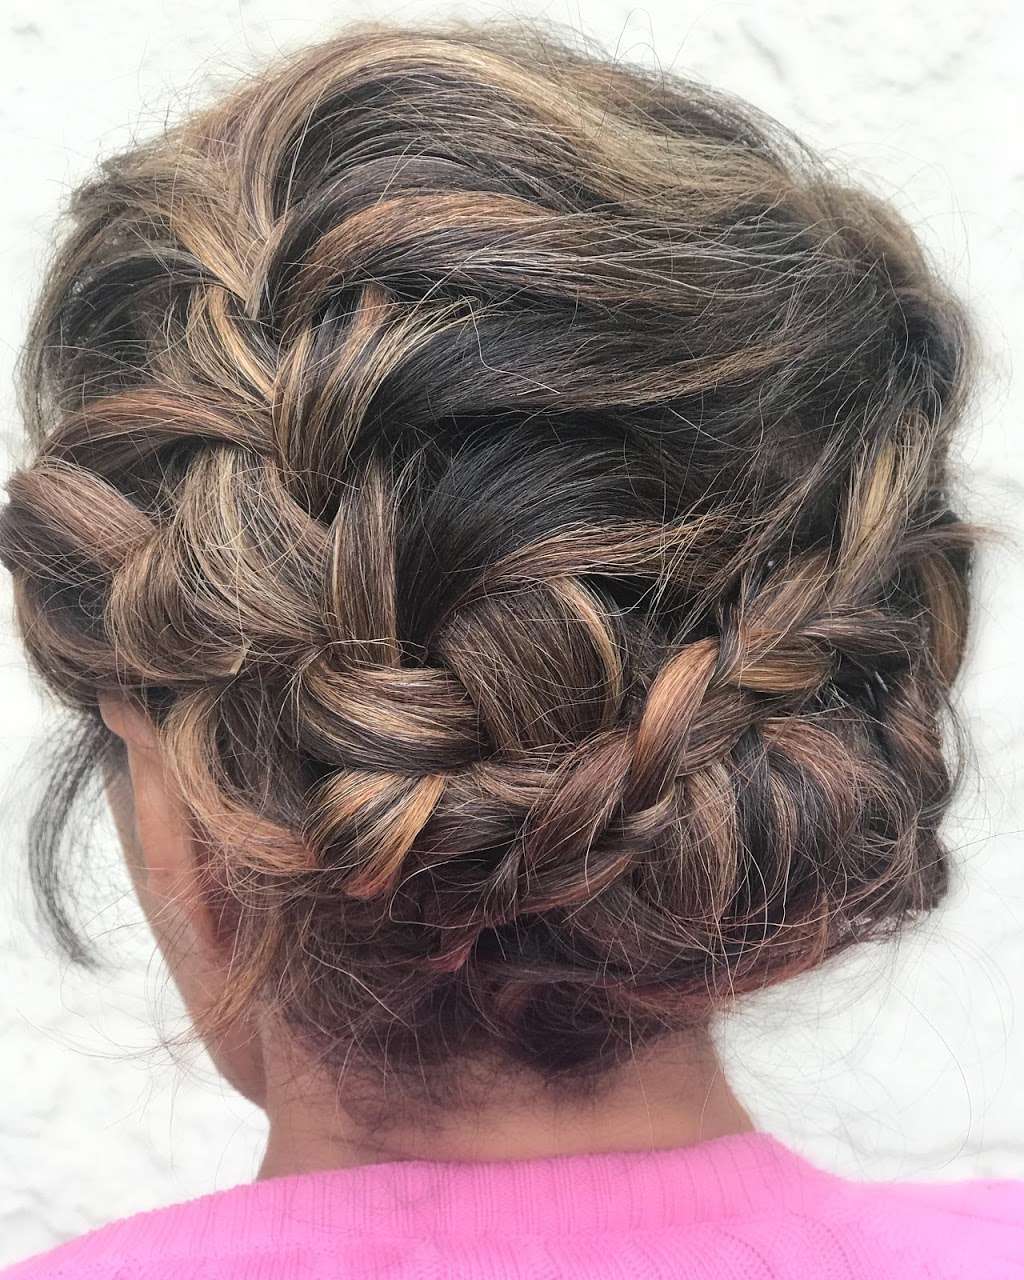 Hair By Erna Hobbs | 10633 S Foothill Blvd, Cupertino, CA 95014 | Phone: (408) 831-2881